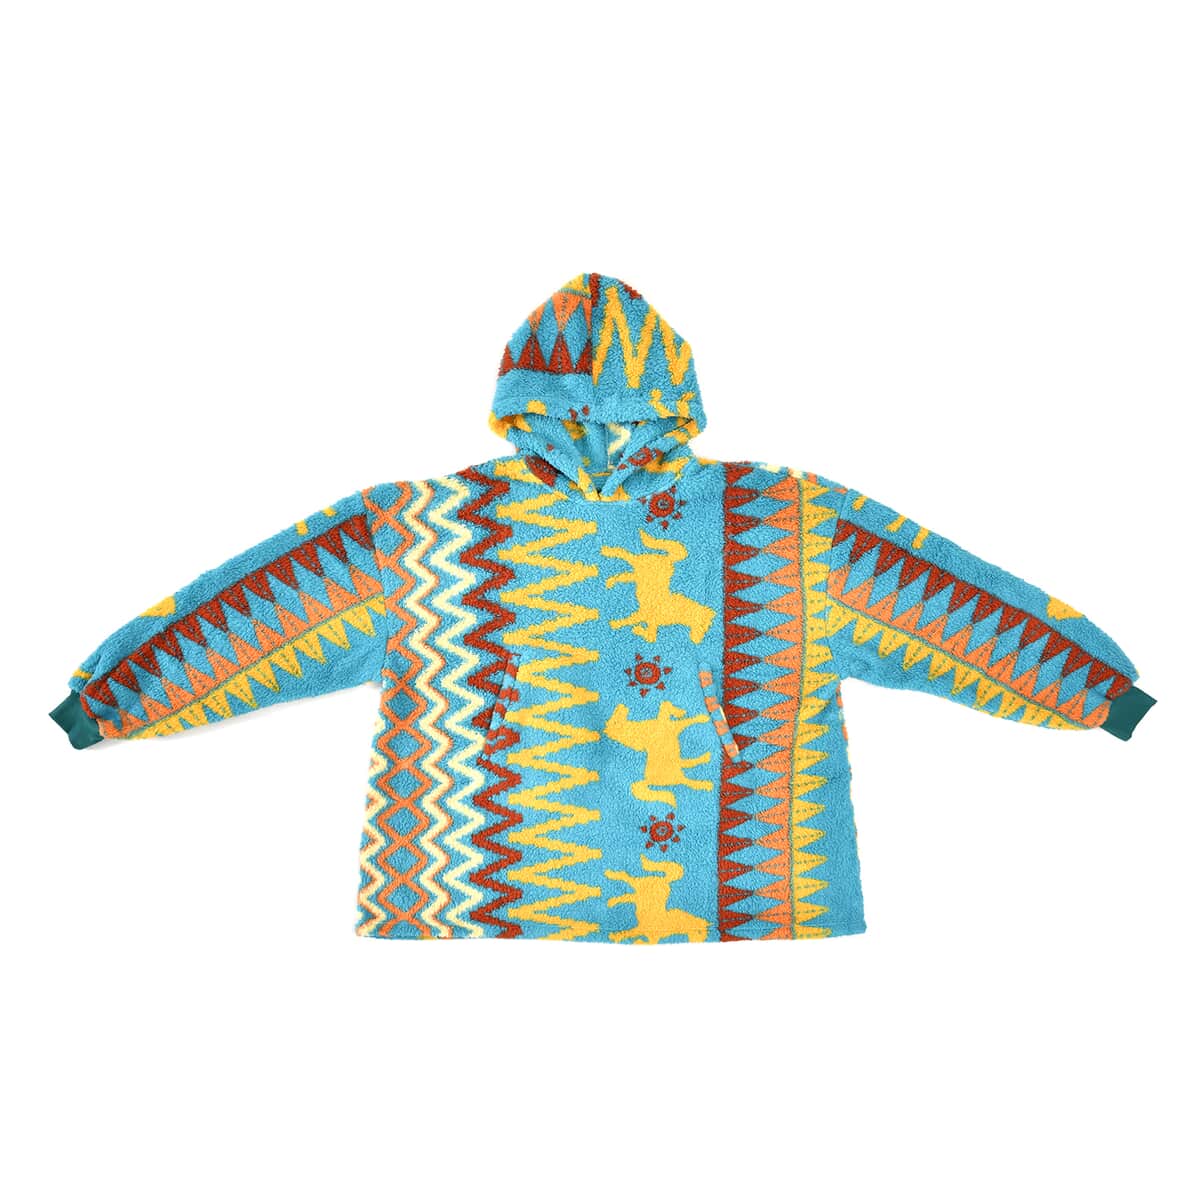 Homesmart Teal Blue and Yellow Abstract and Tribal Pattern Sherpa Sweatshirt with Hood image number 0